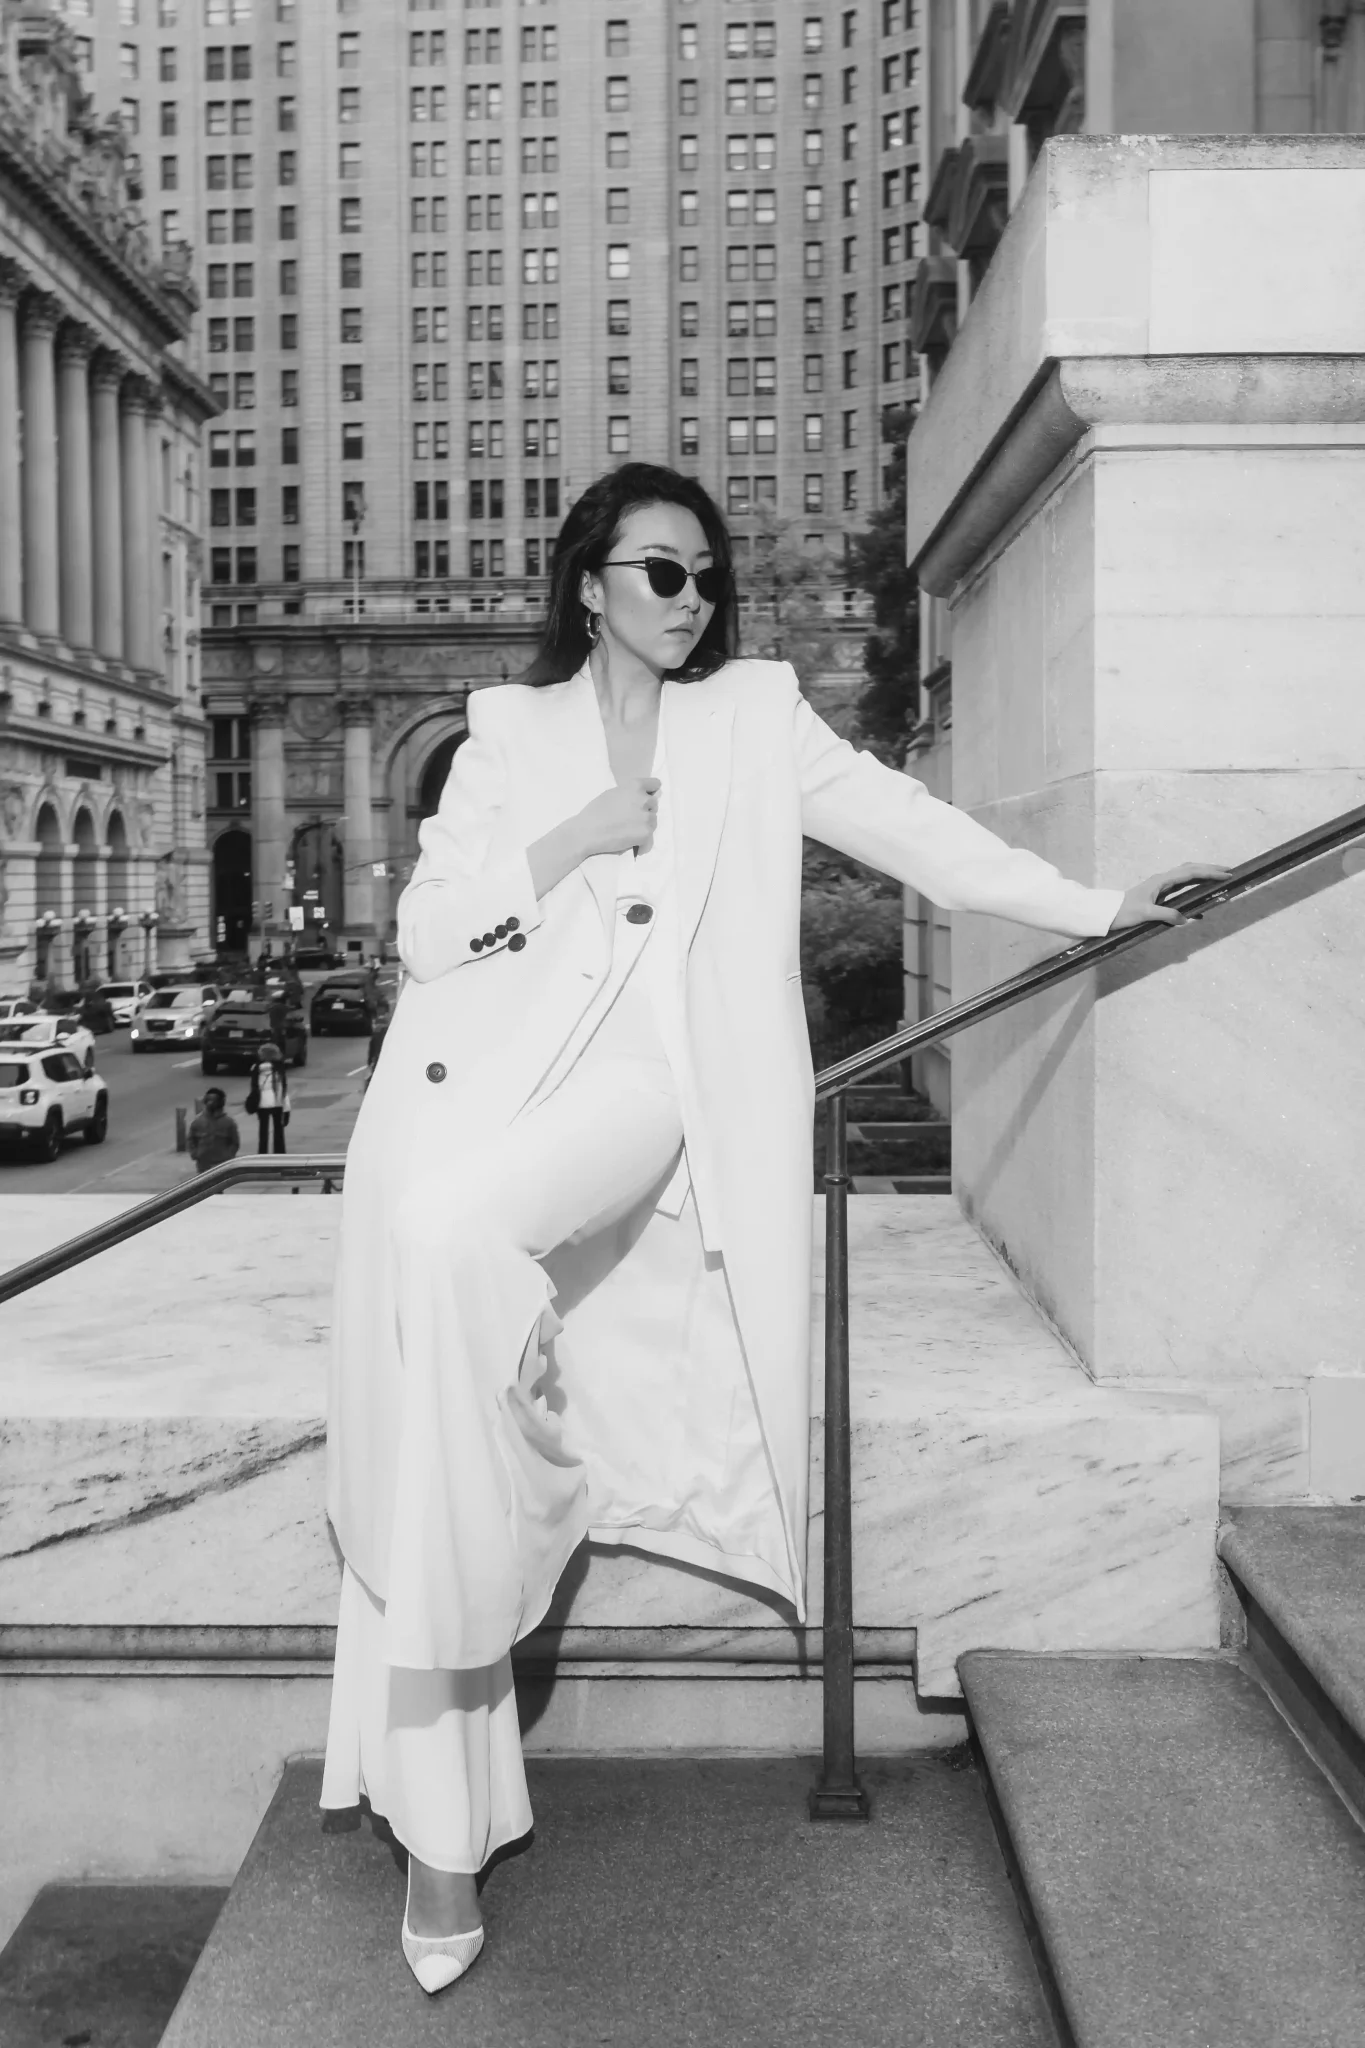 A woman in a white coat posing on the steps of a building.